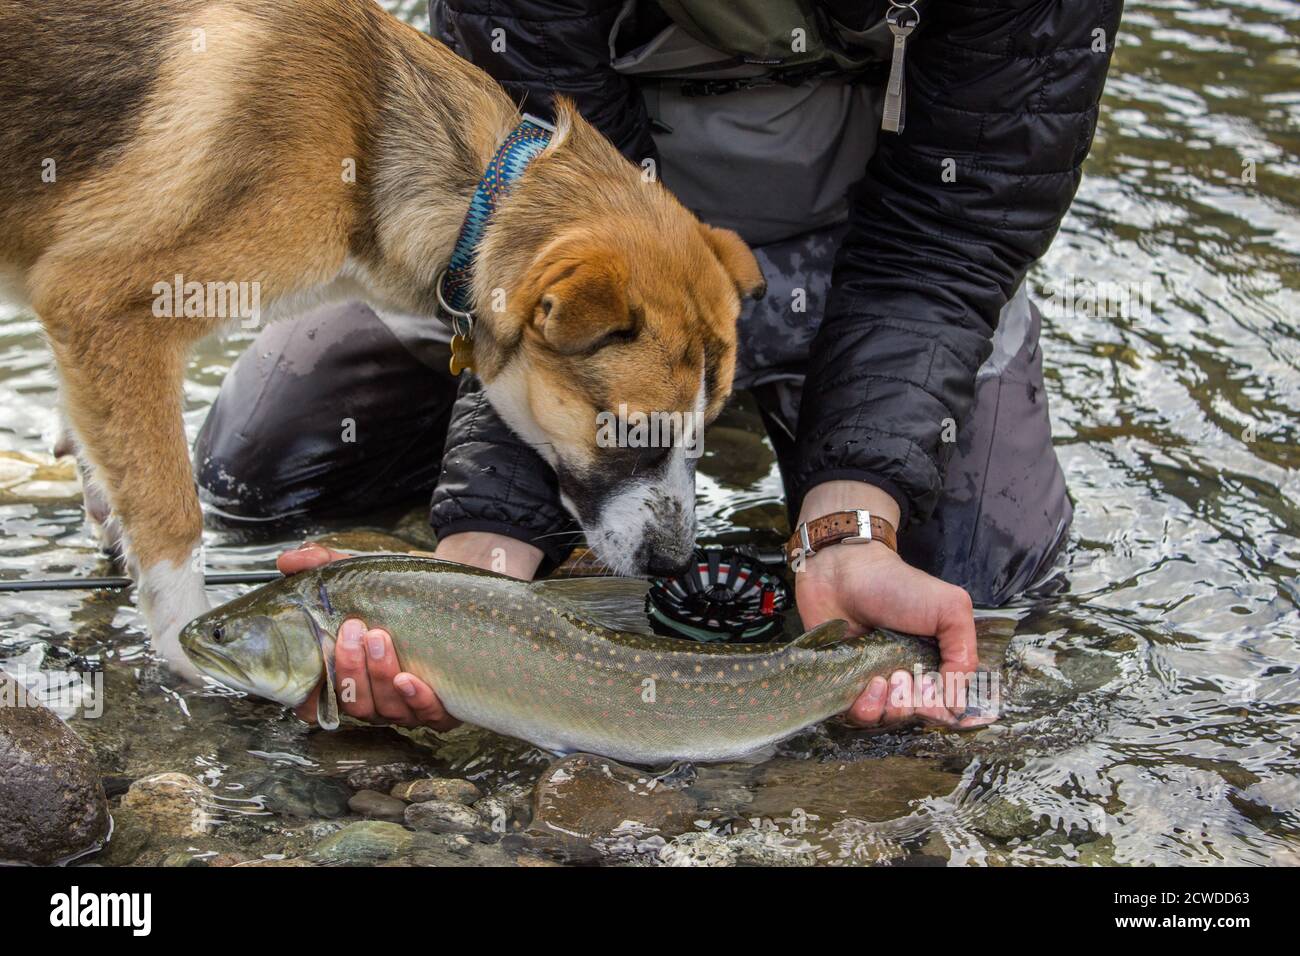 A close up of a fisherman with a bull trout and his St Bernard Husky cross dog inspecting the fish on a river in Squamish, British Columbia, Canada Stock Photo